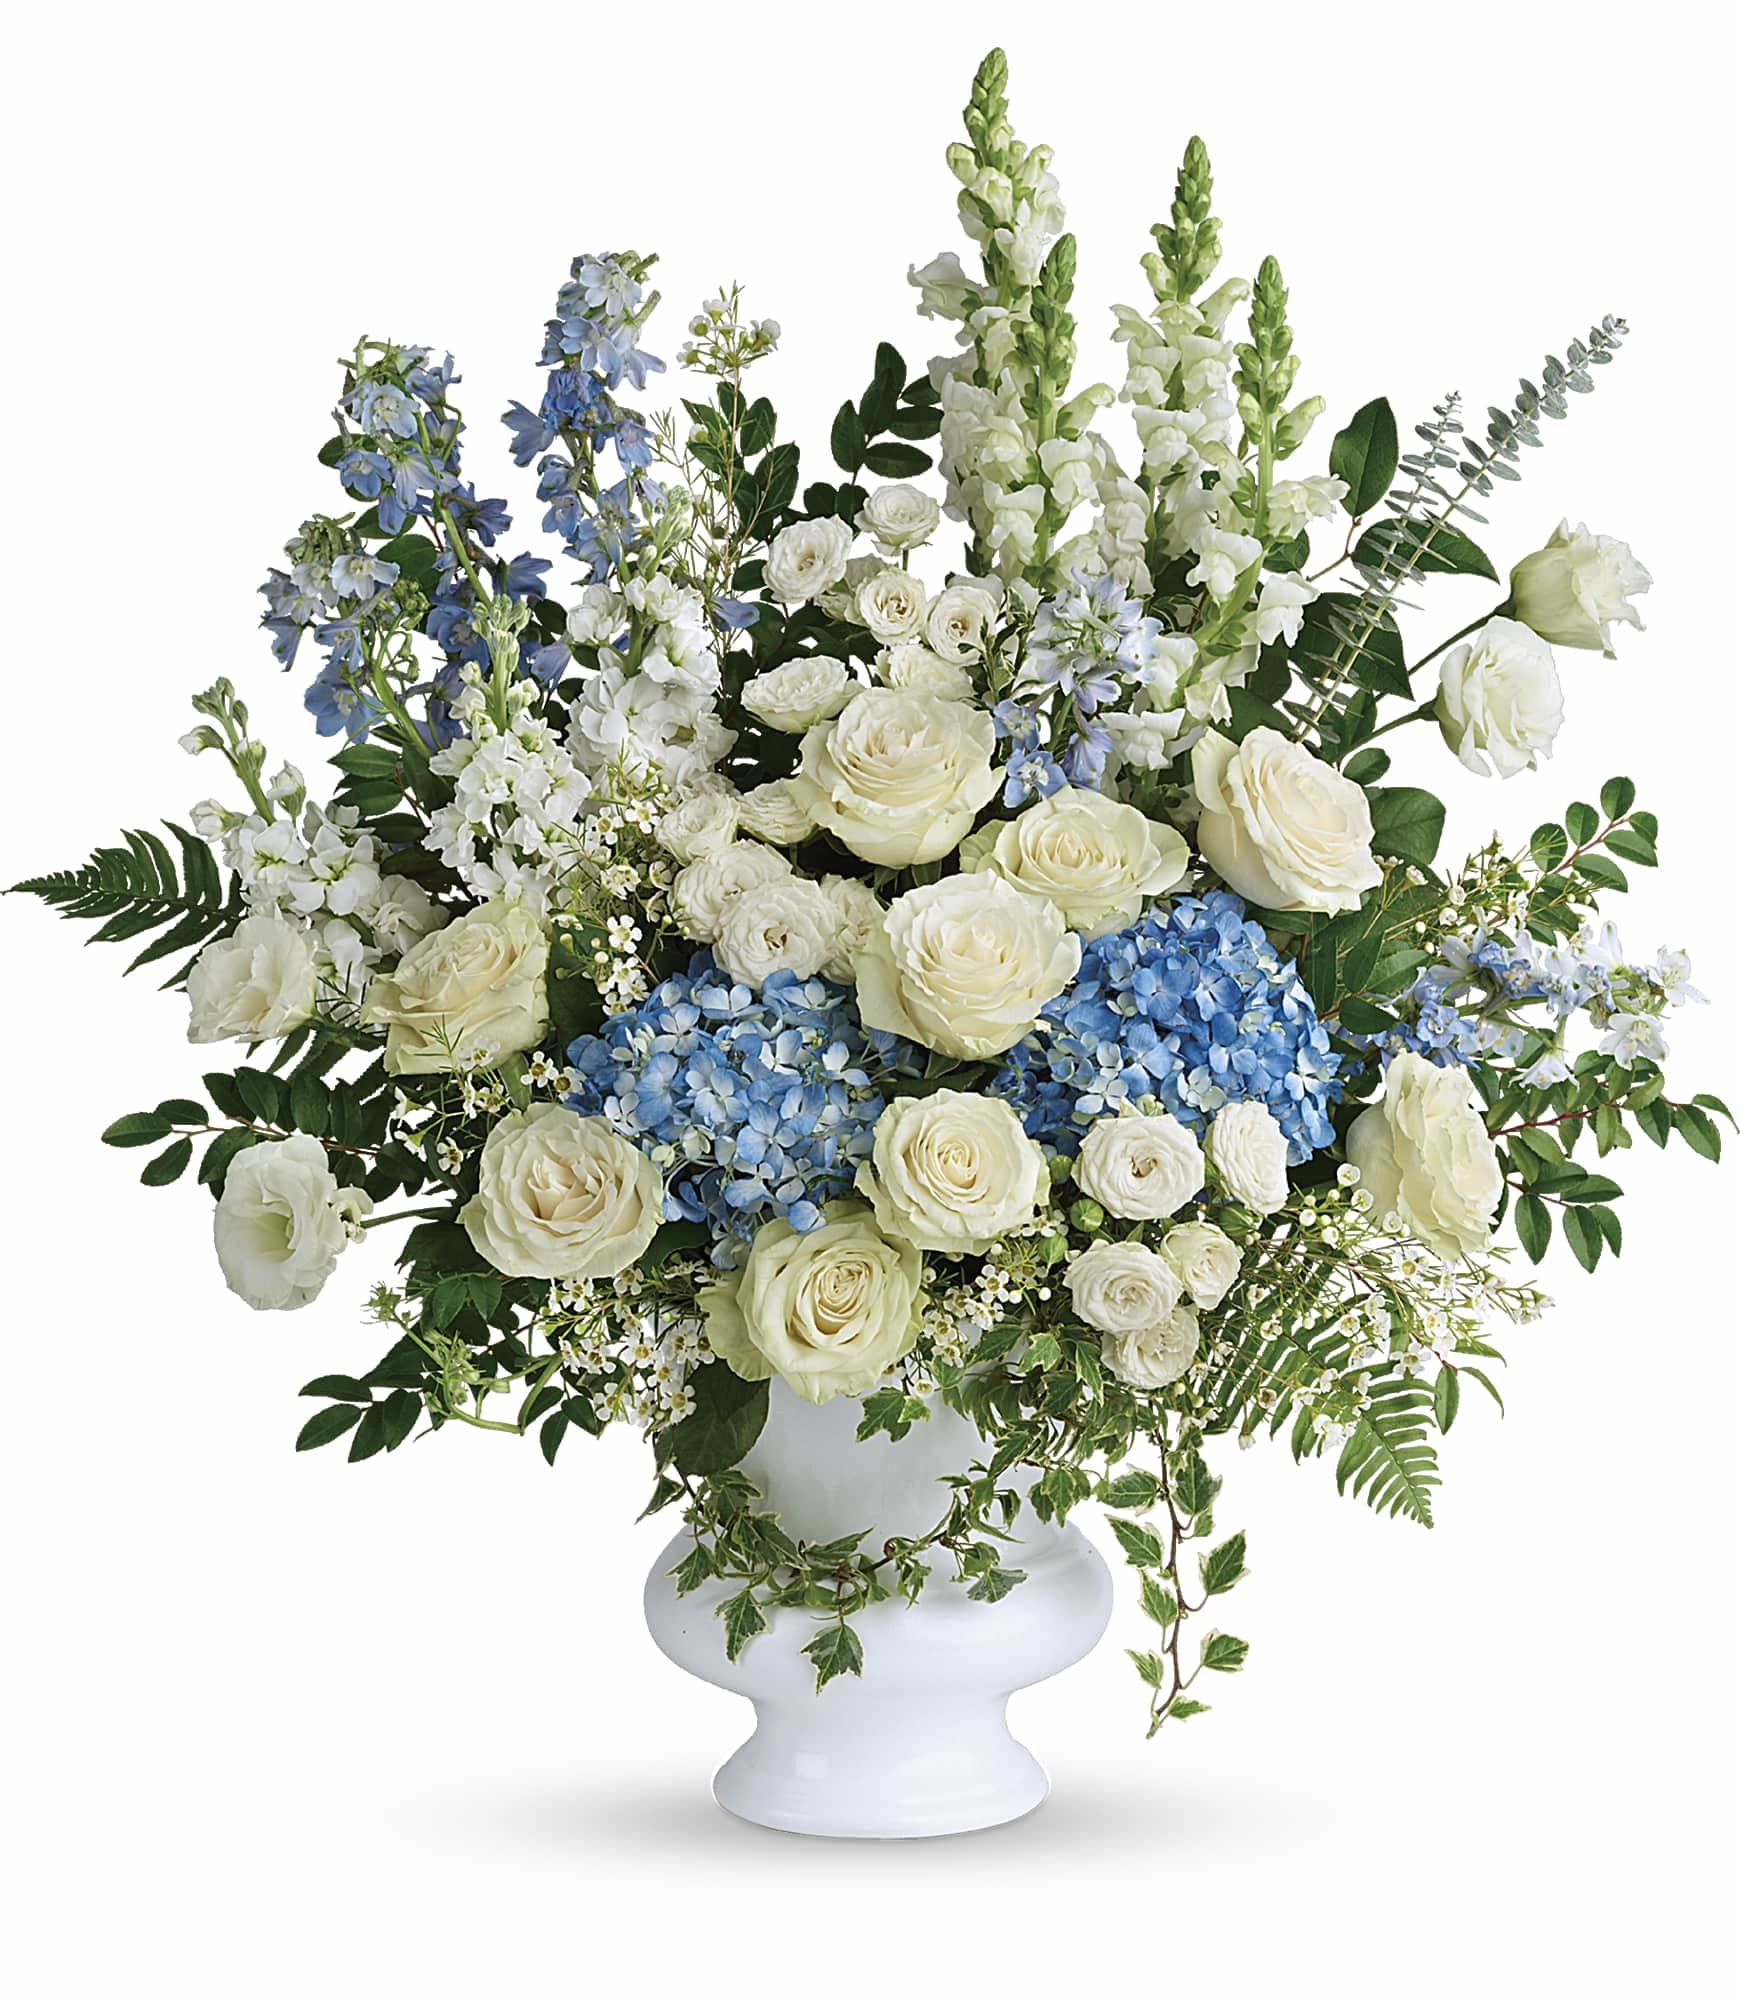 Treasured And Beloved Bouquet - A treasured tribute to your beloved, this gorgeously grand bouquet of soft blue hydrangea and pure white roses is reminiscent of a clear sky, a hopeful reminder of life and love. 